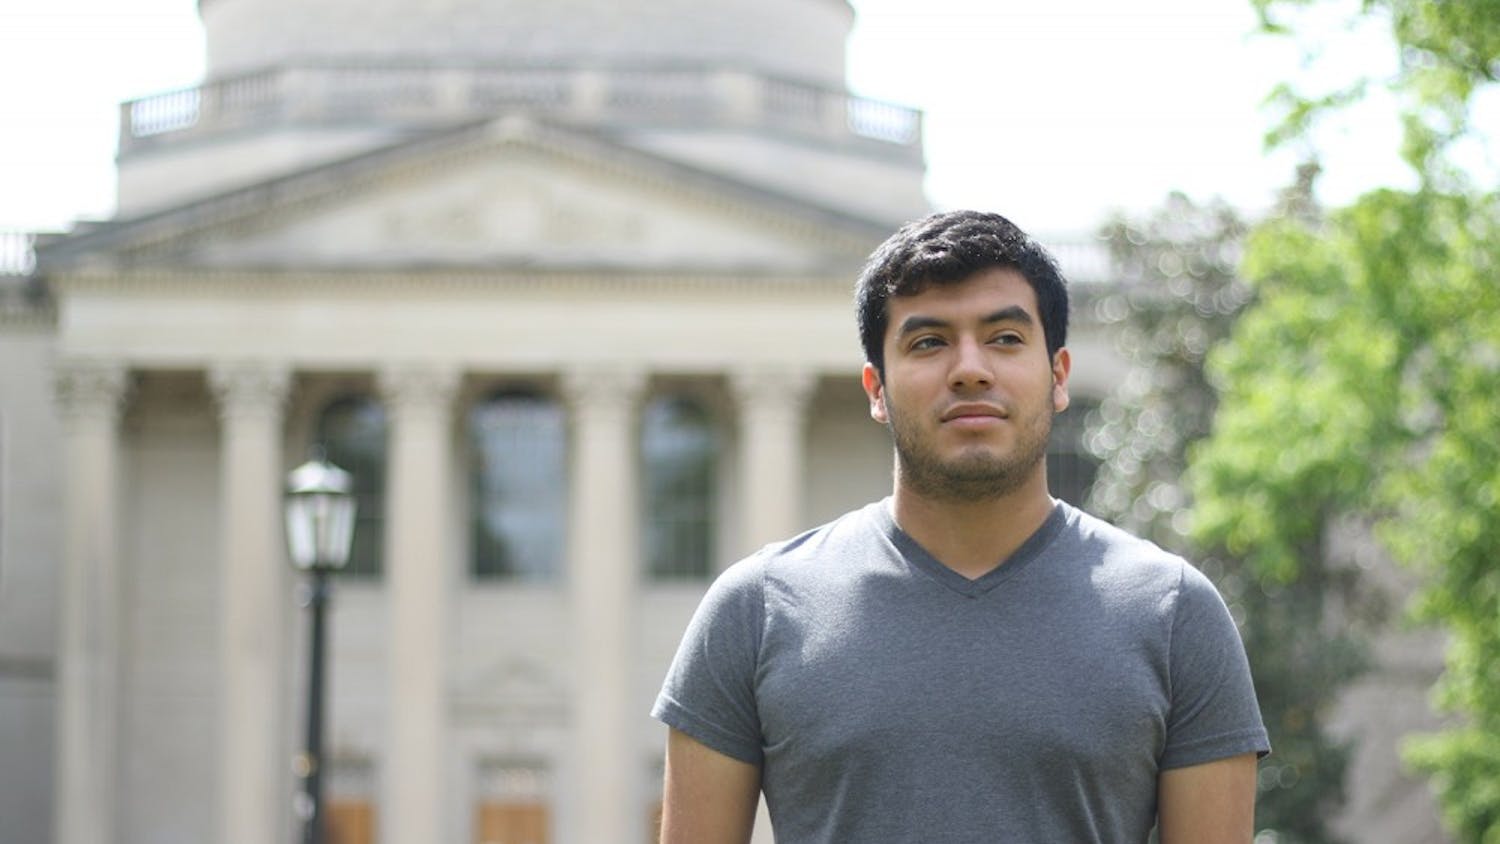 Eddy Fernandez, a first-year student hoping to major in Health Policy and Management, is a Carolina Covenant Scholar. The Covenant program makes education affordable for Carolina undergraduate students from low-income families. 